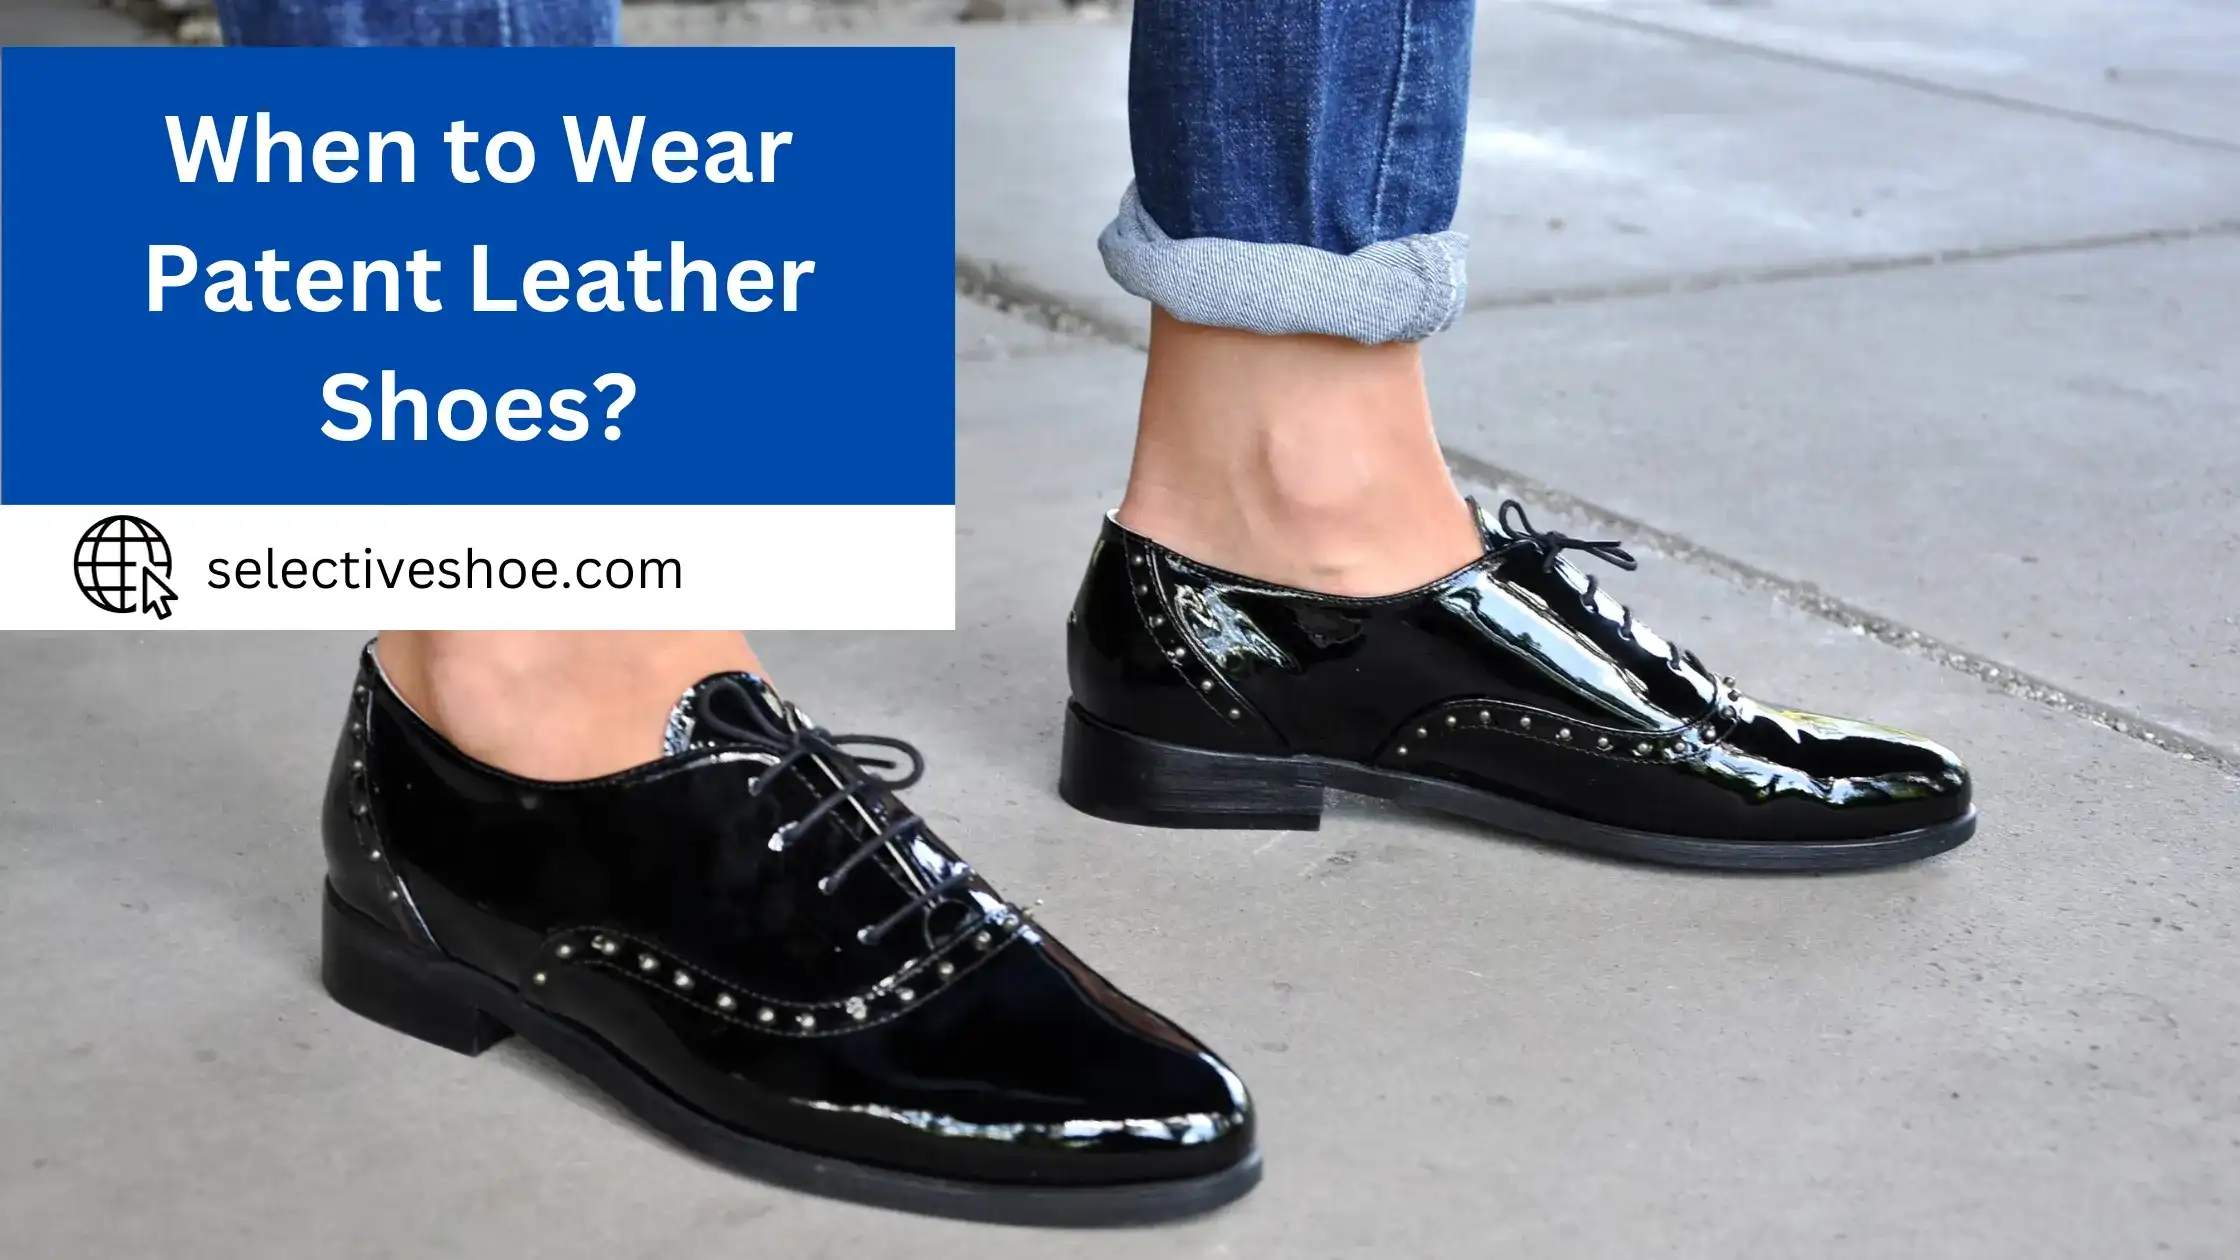 When to Wear Patent Leather Shoes? (An In-Depth Guide)